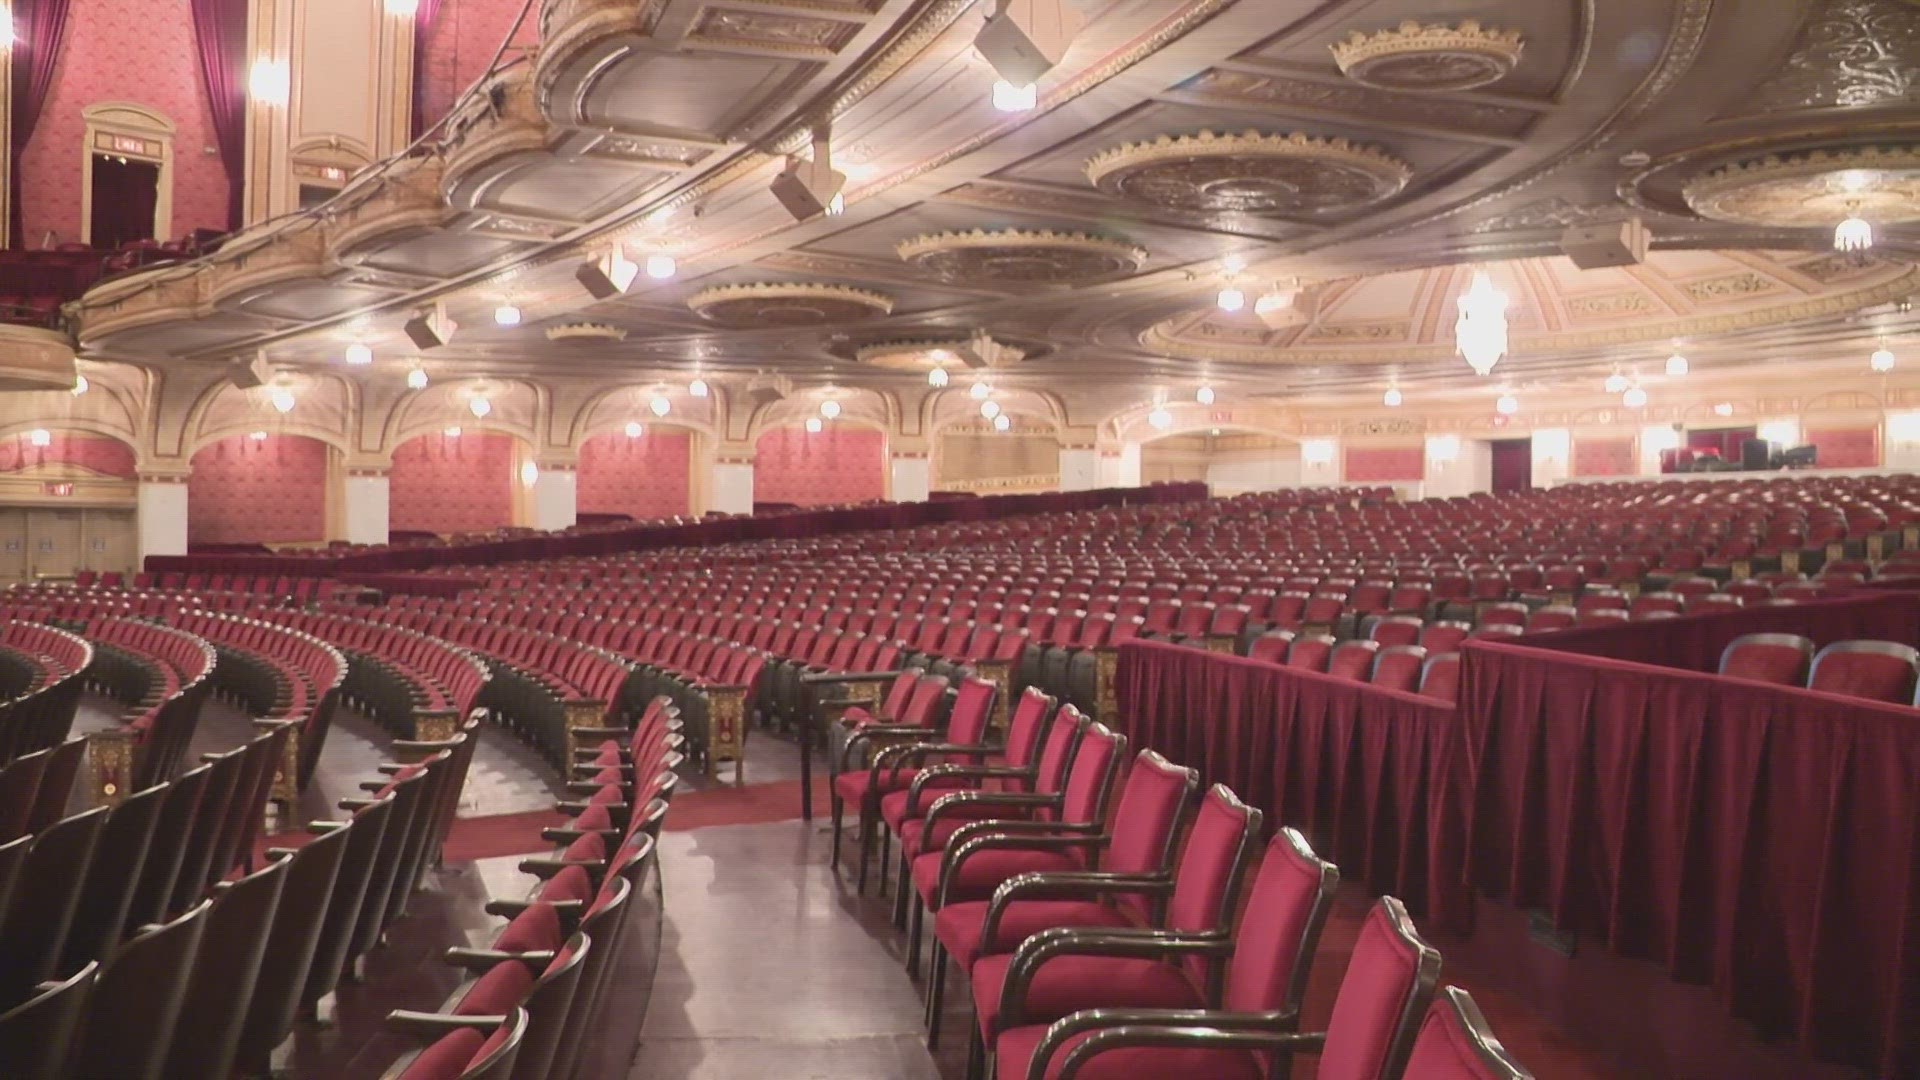 For the first time since 2020, Playhouse Square will restart its free public tours.